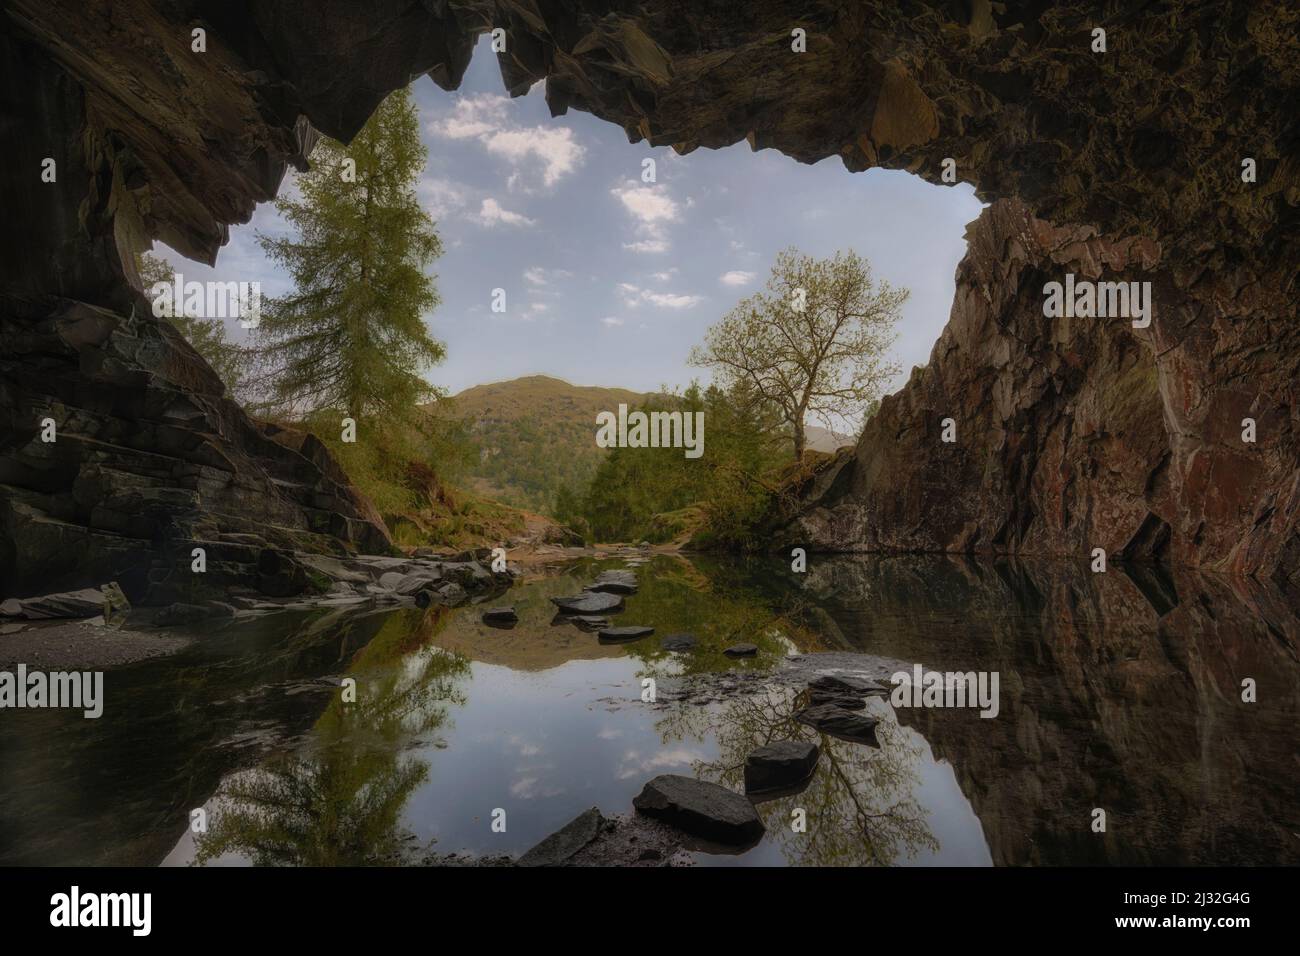 Looking out of the cave, Rydal Cave, Lake District, England, UK. Stock Photo